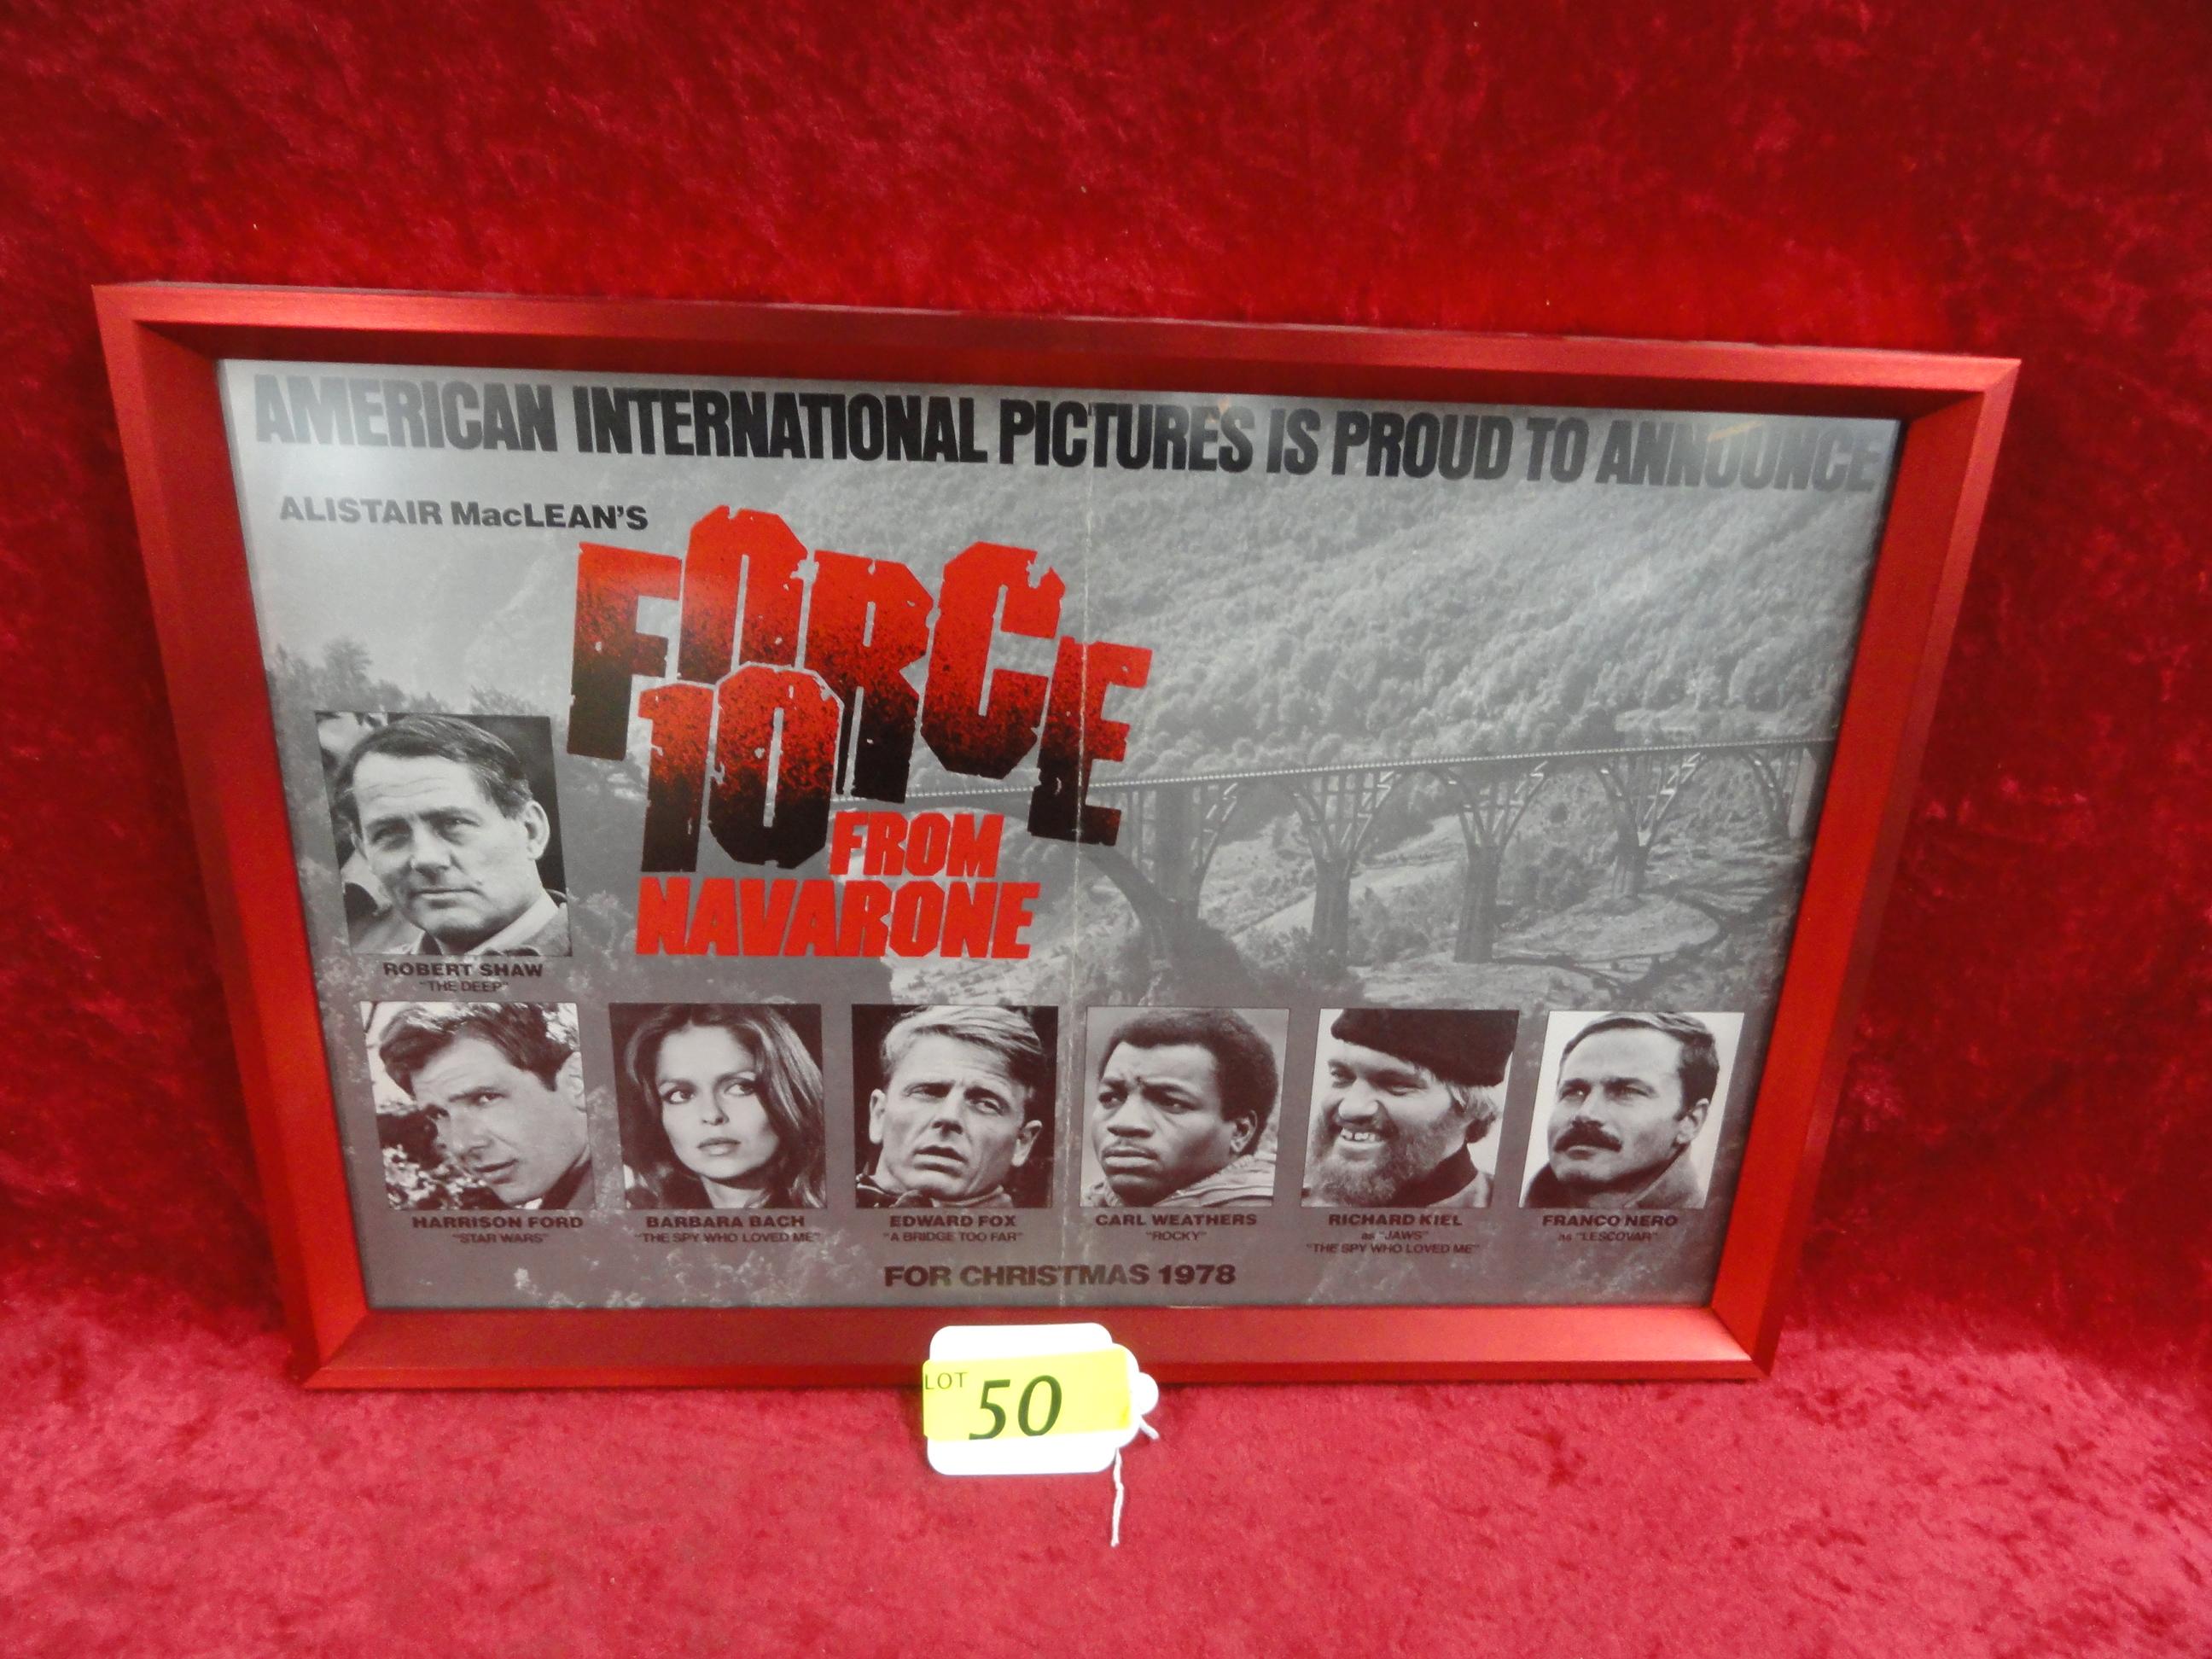 VINTAGE MOVIE POSTER: "FORCE 10 FROM NAVARONE" 1978